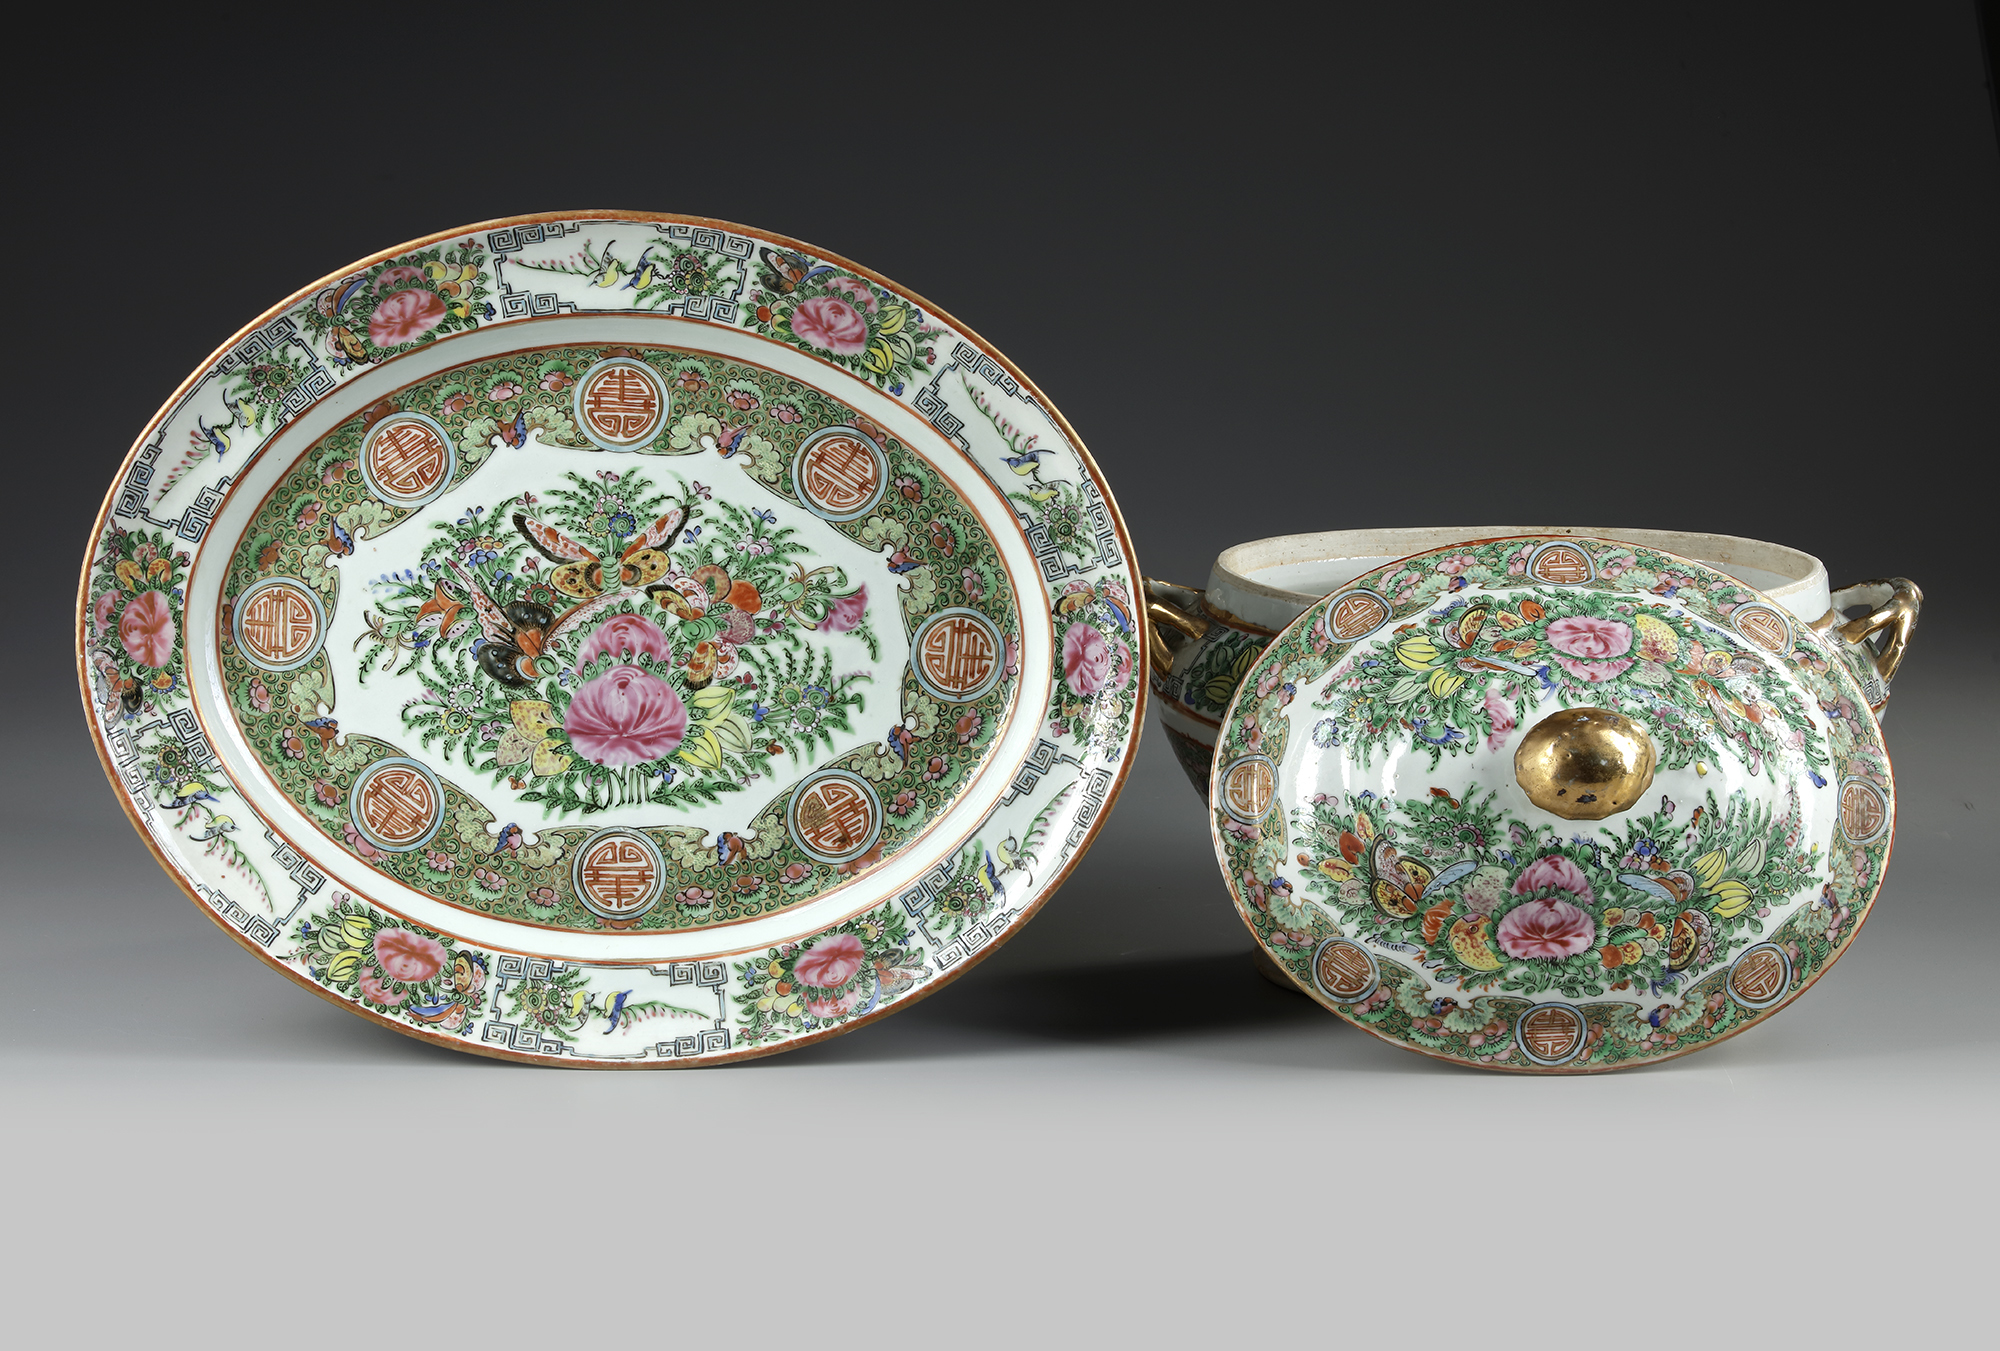 A CANTONESE FAMILLE ROSE TUREEN, COVER AND STAND, 19TH CENTURY - Image 5 of 6